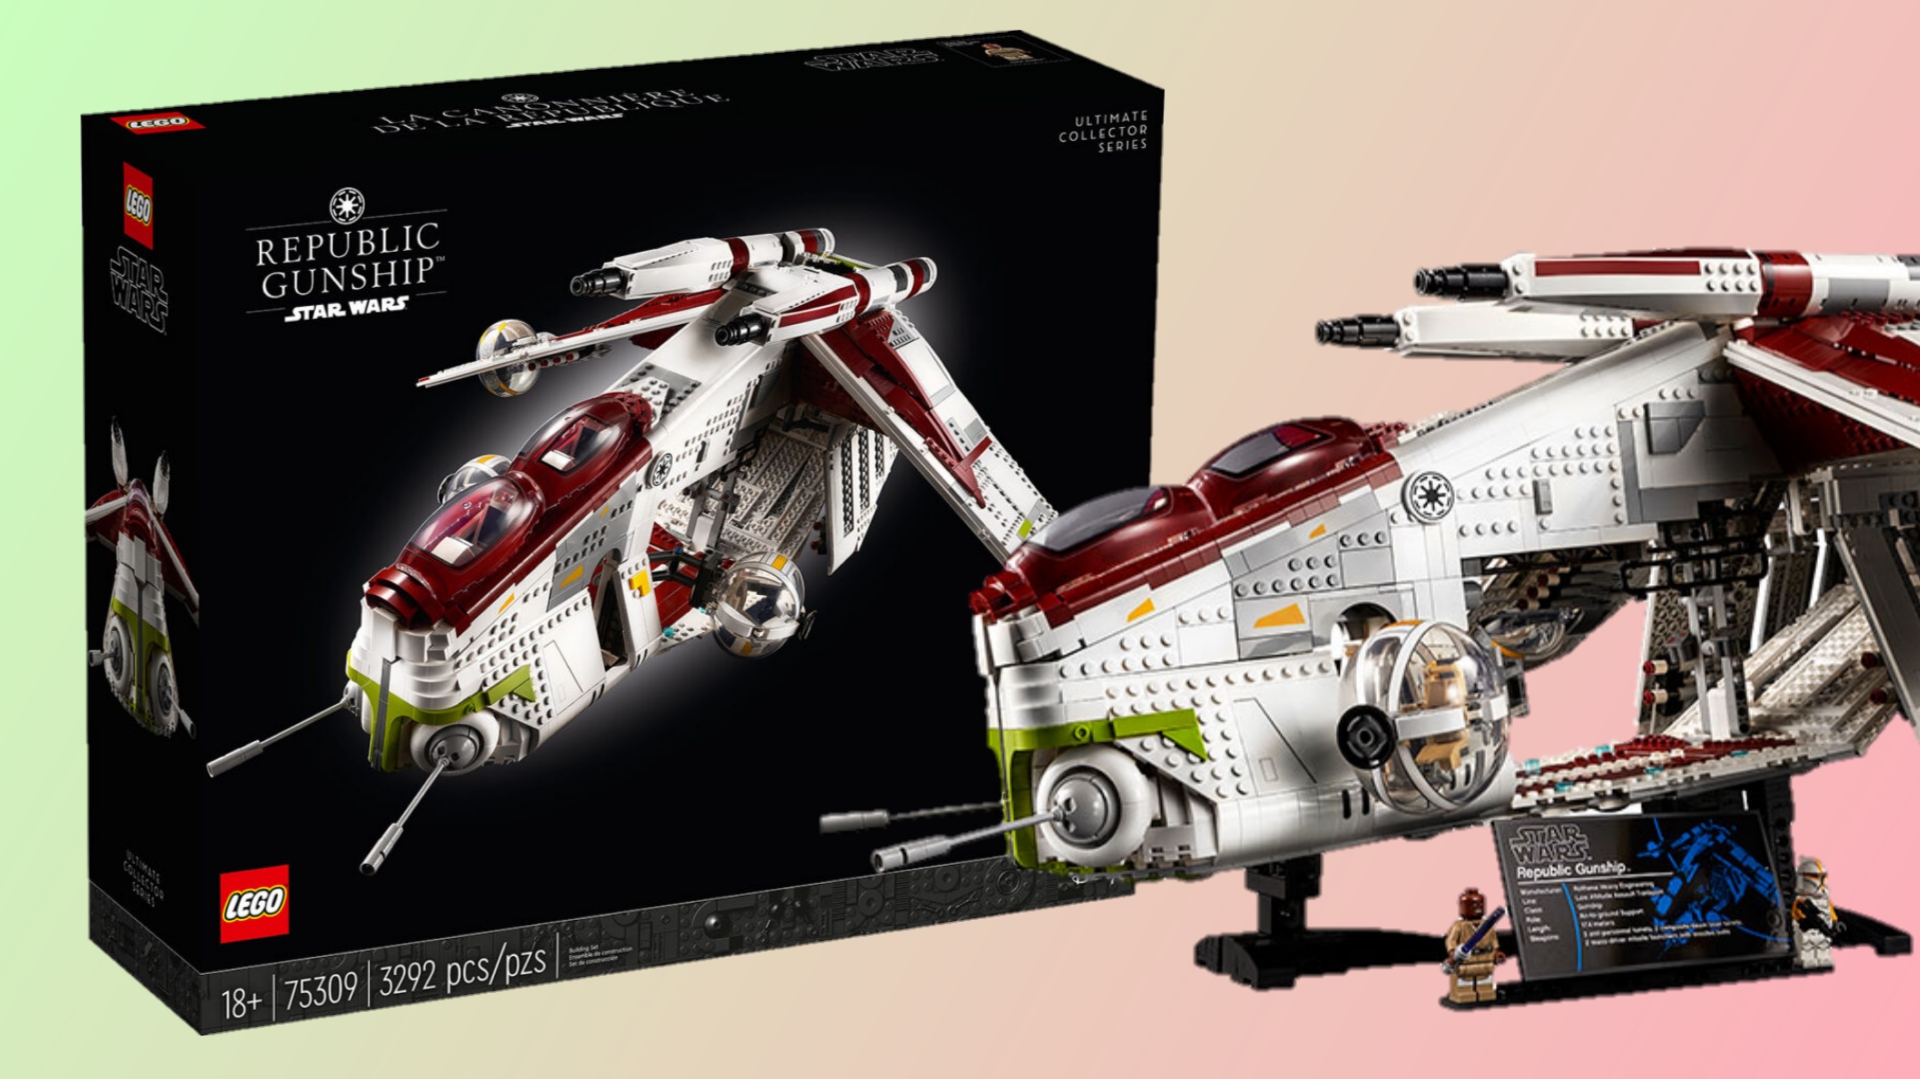 LEGO Star Wars UCS Republic Gunship 75309 Officially Revealed! The